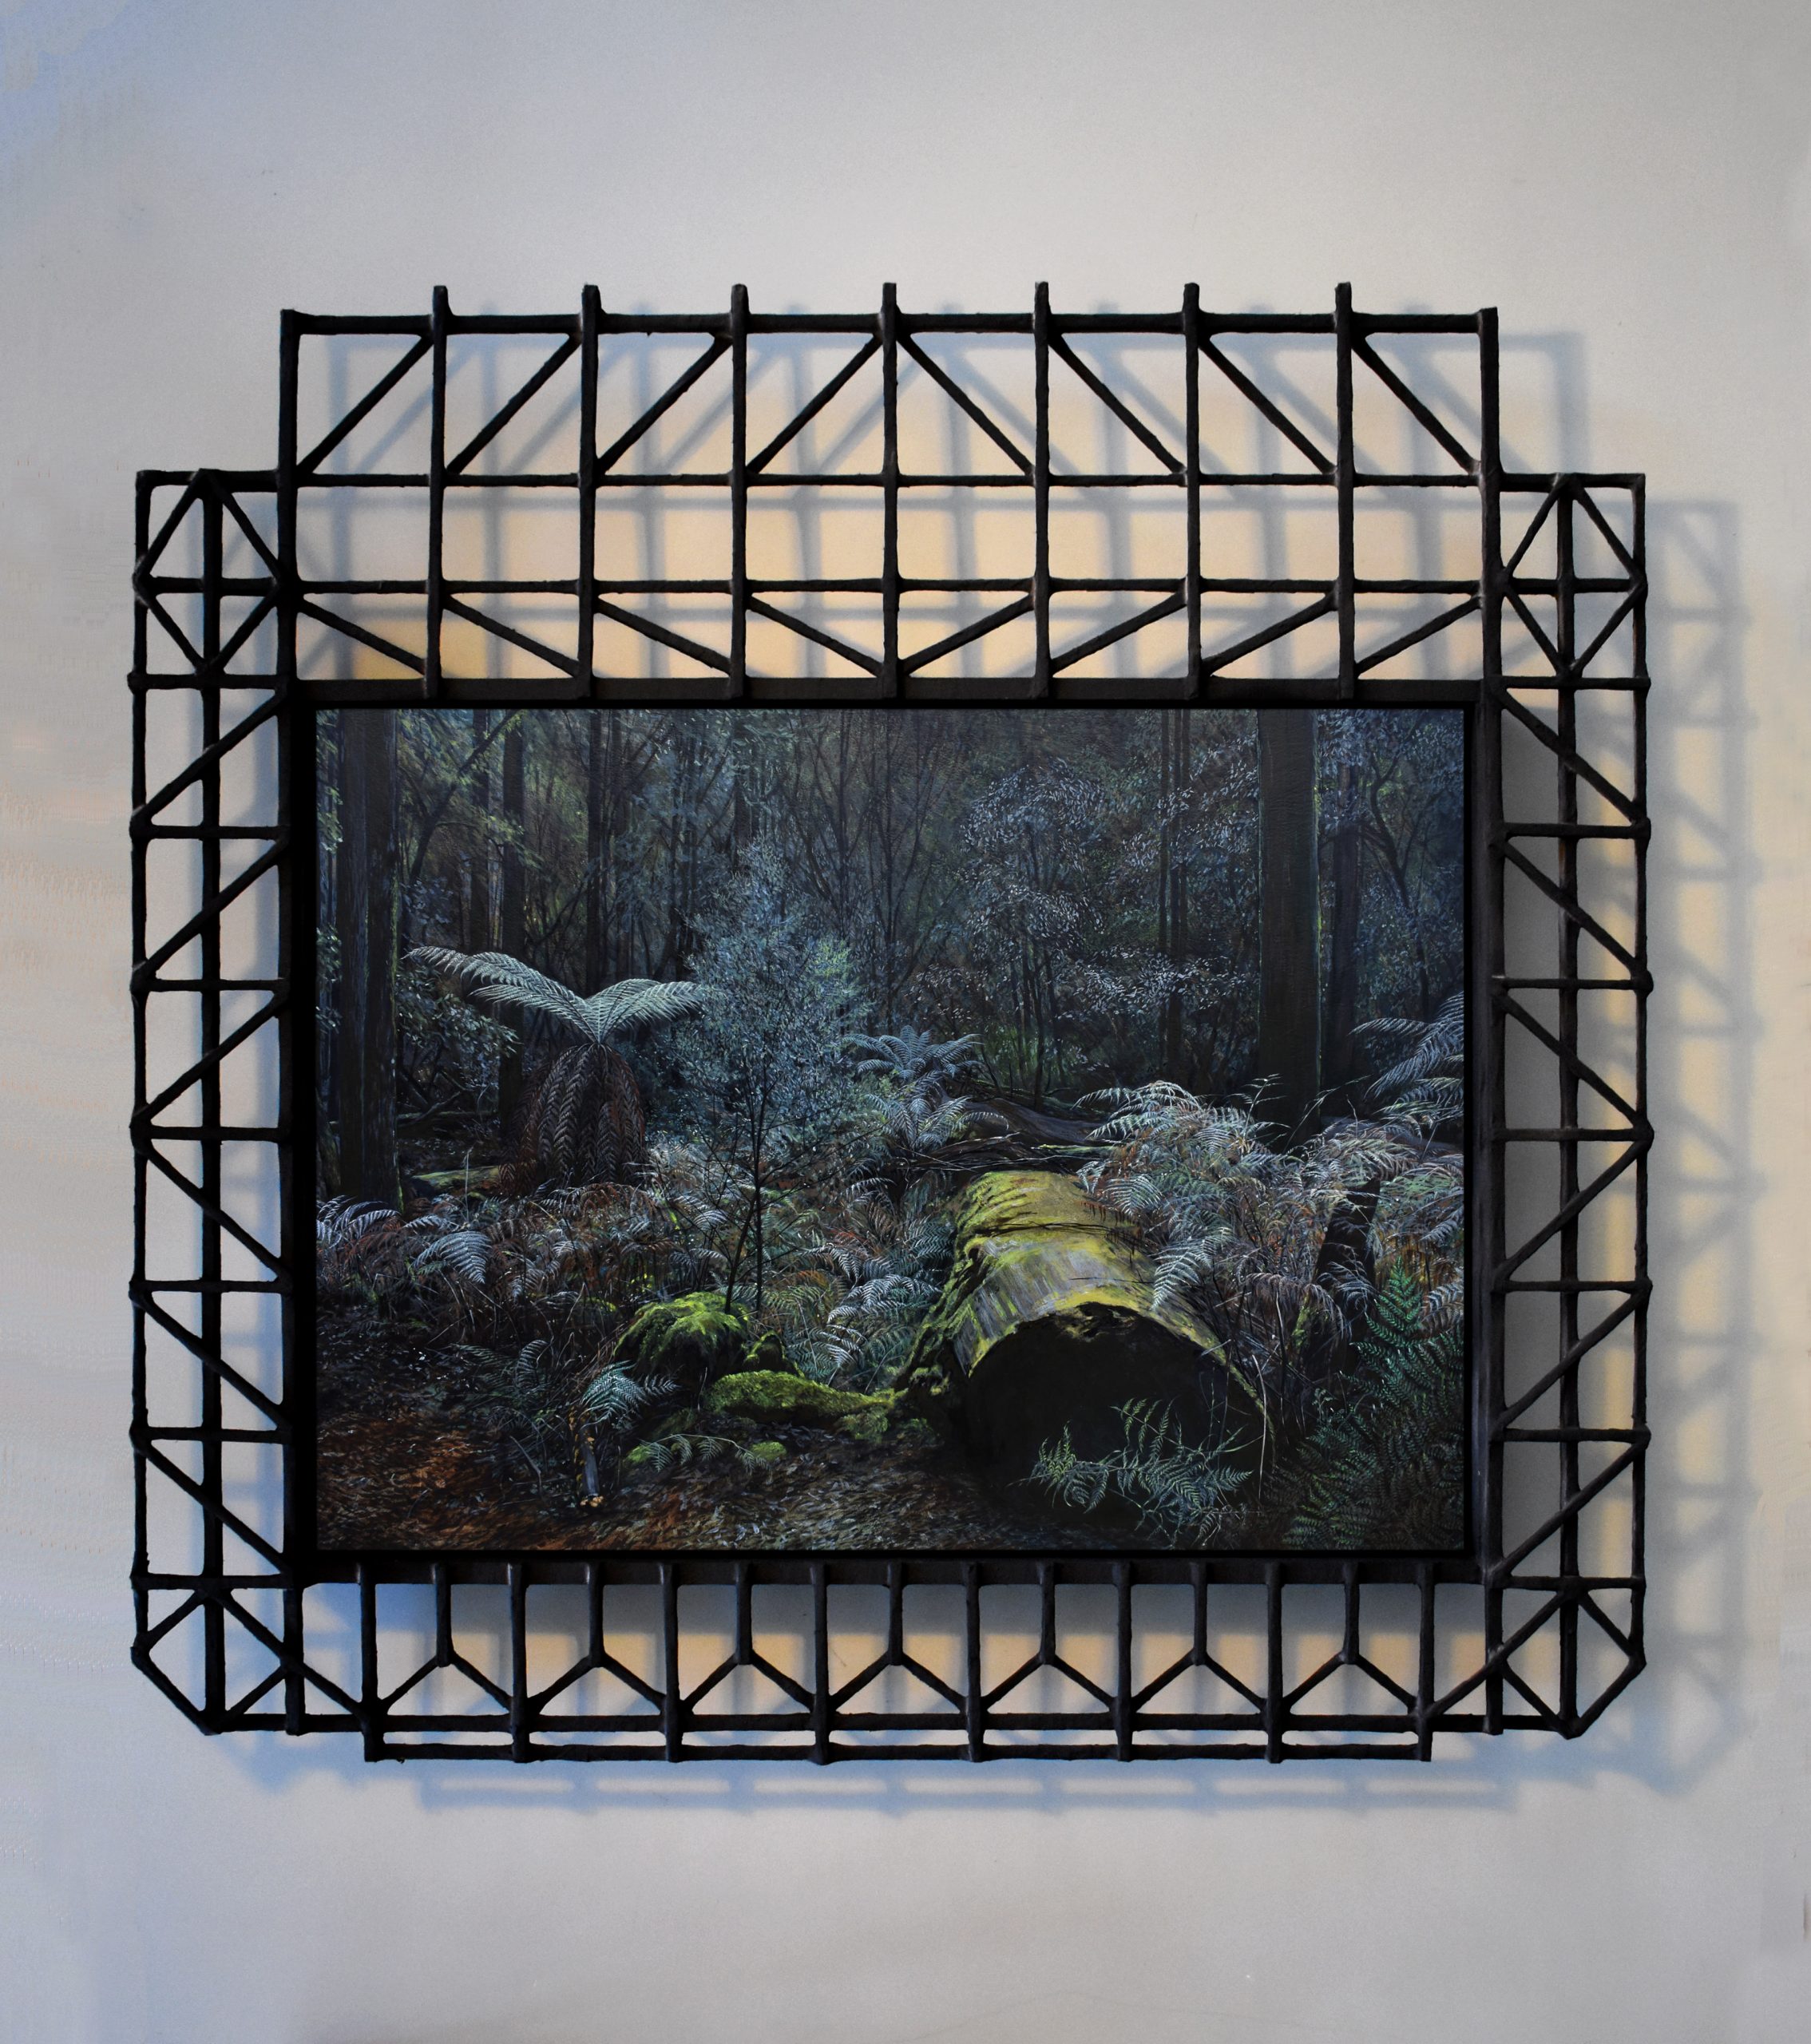 WC12 - Fern, shrub and felled tree, 2020 | Oil painting on canvas with papier-mâché and timber frame | 810 x 800mm